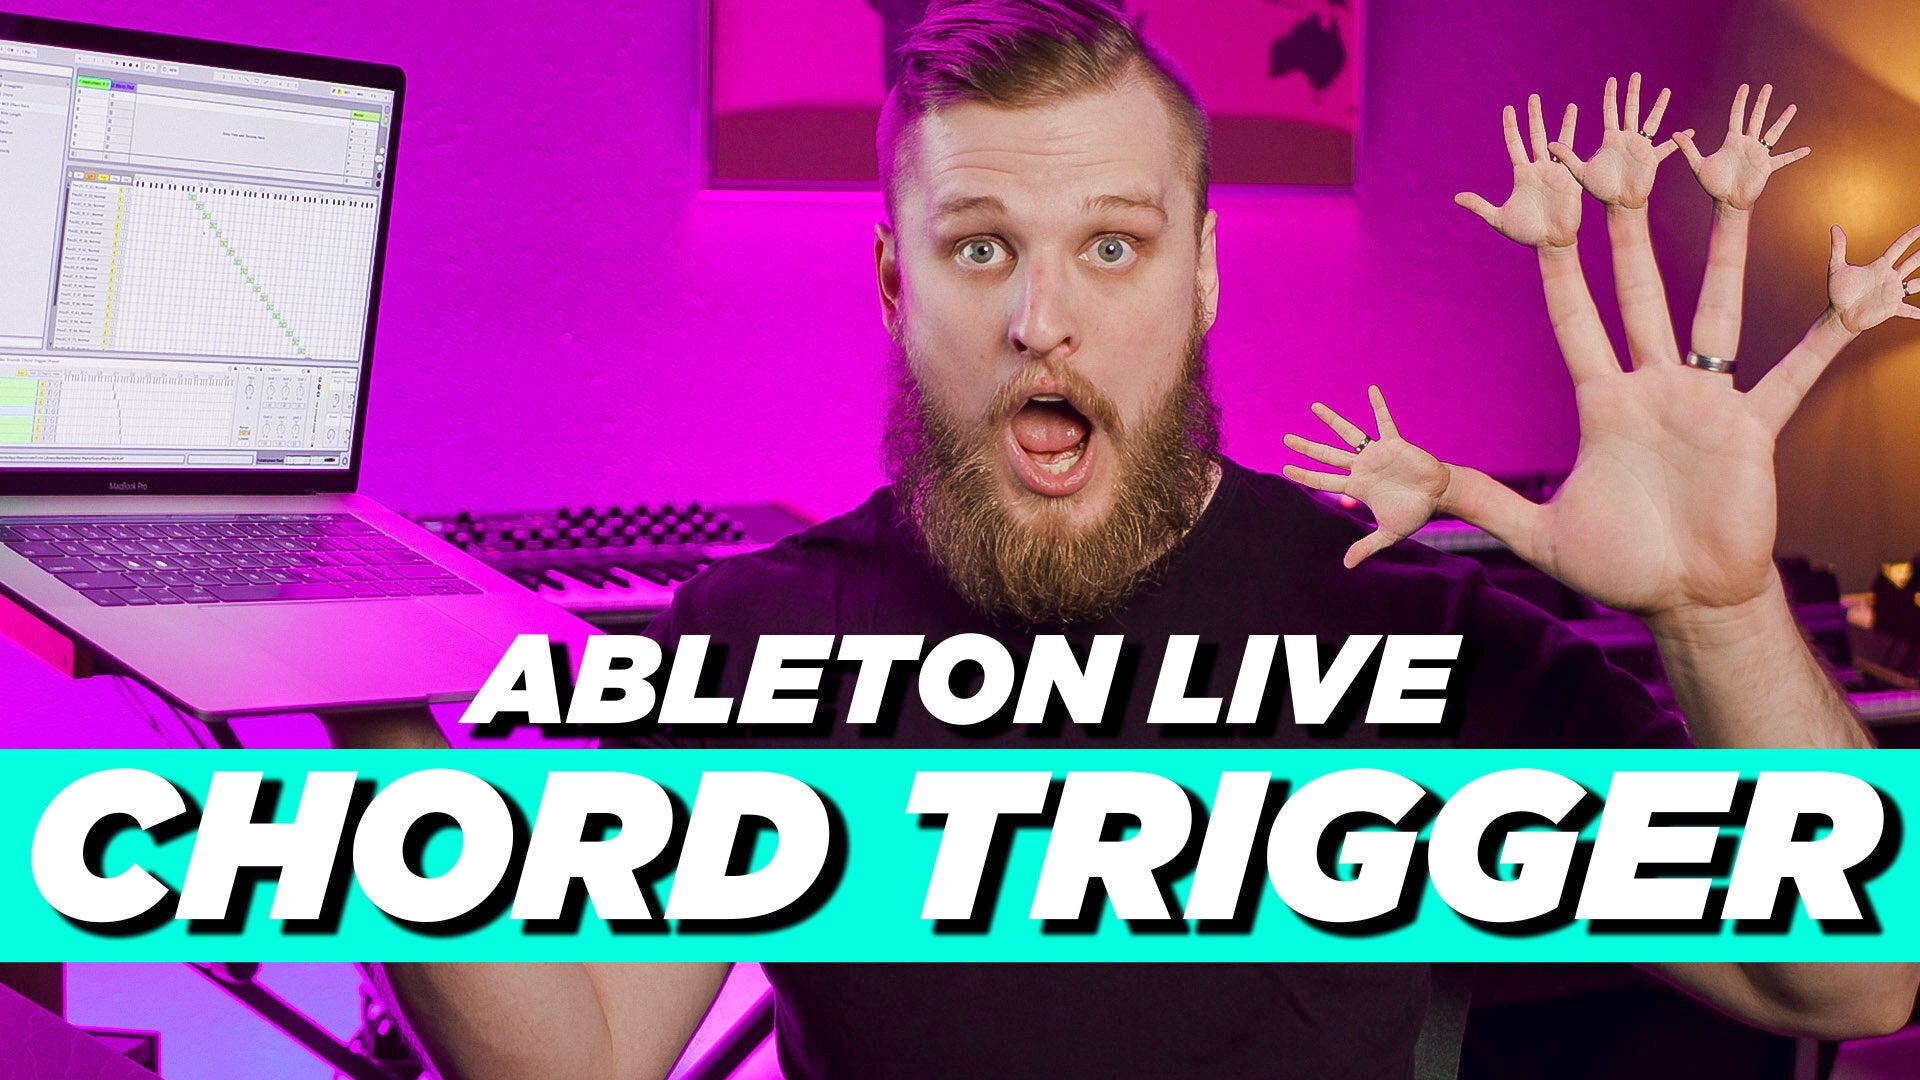 How to Add Chord Trigger FX to Ableton Live - Worship Keyboard Tutorial